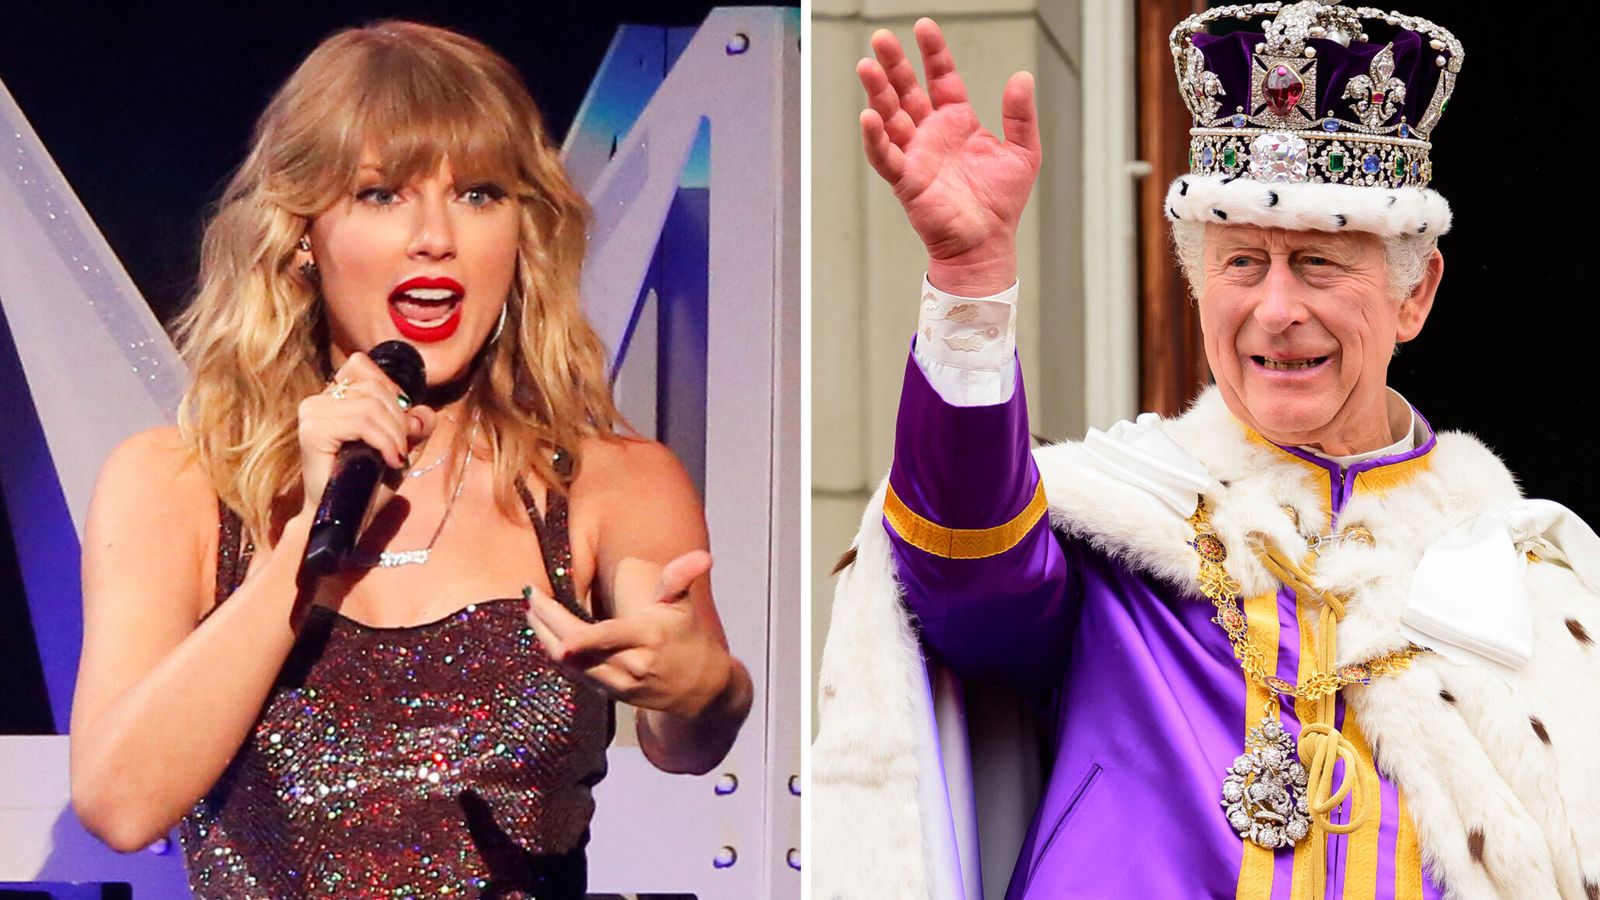 Taylor Swift ‘turned down offer to perform at King’s coronation’